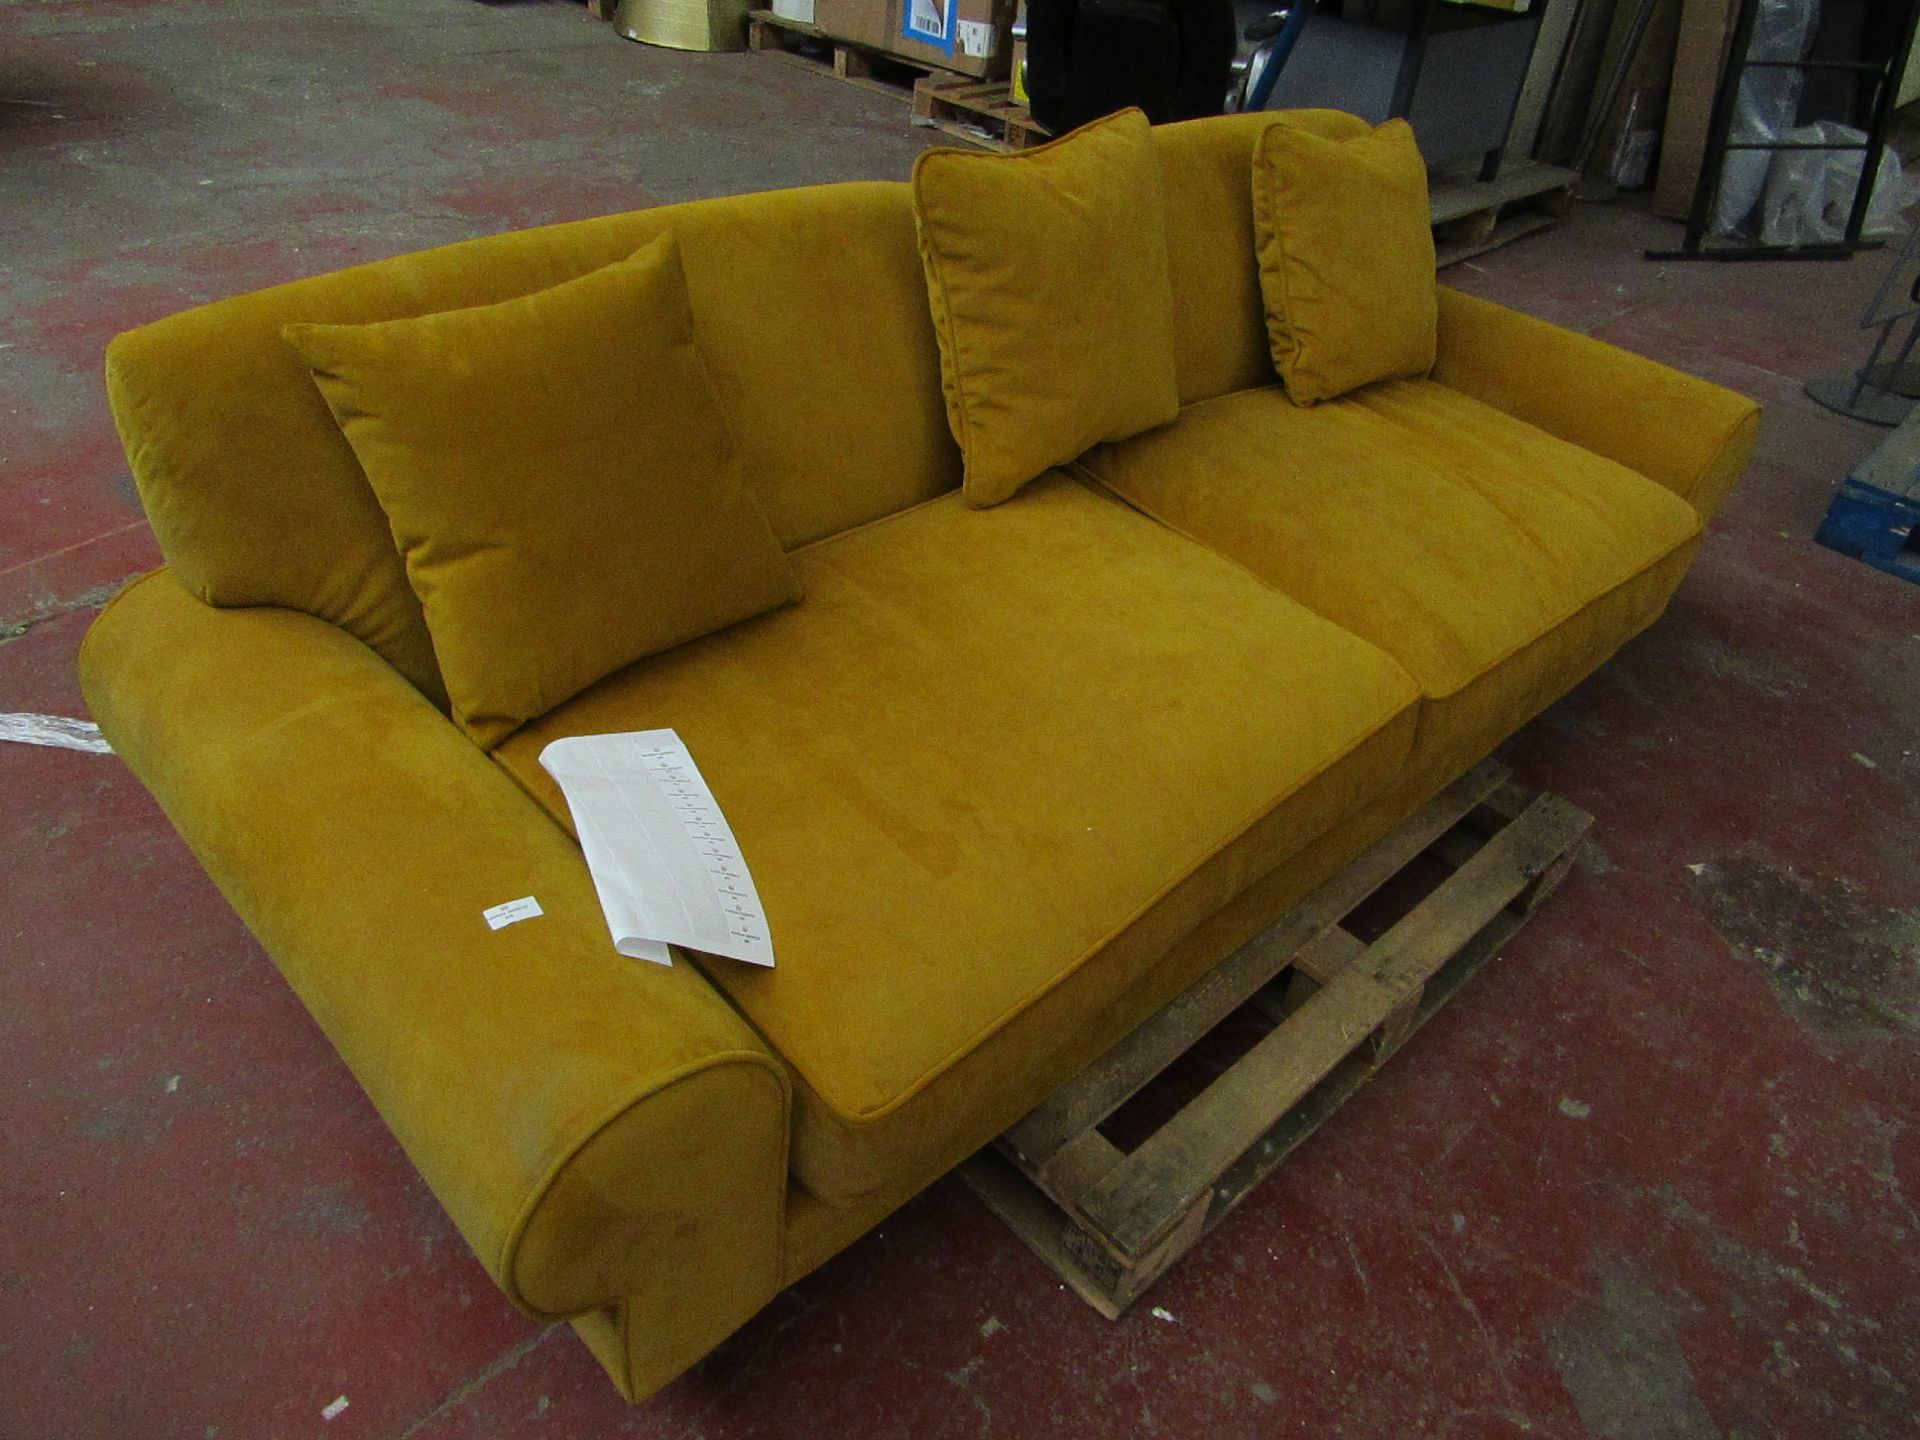 | 1X | MADE.COM 3 SEATER MUSTARD YELLOW VELVET | NO PHISICAL DAMAGE VISIBLE & NO FEET PRESENT |